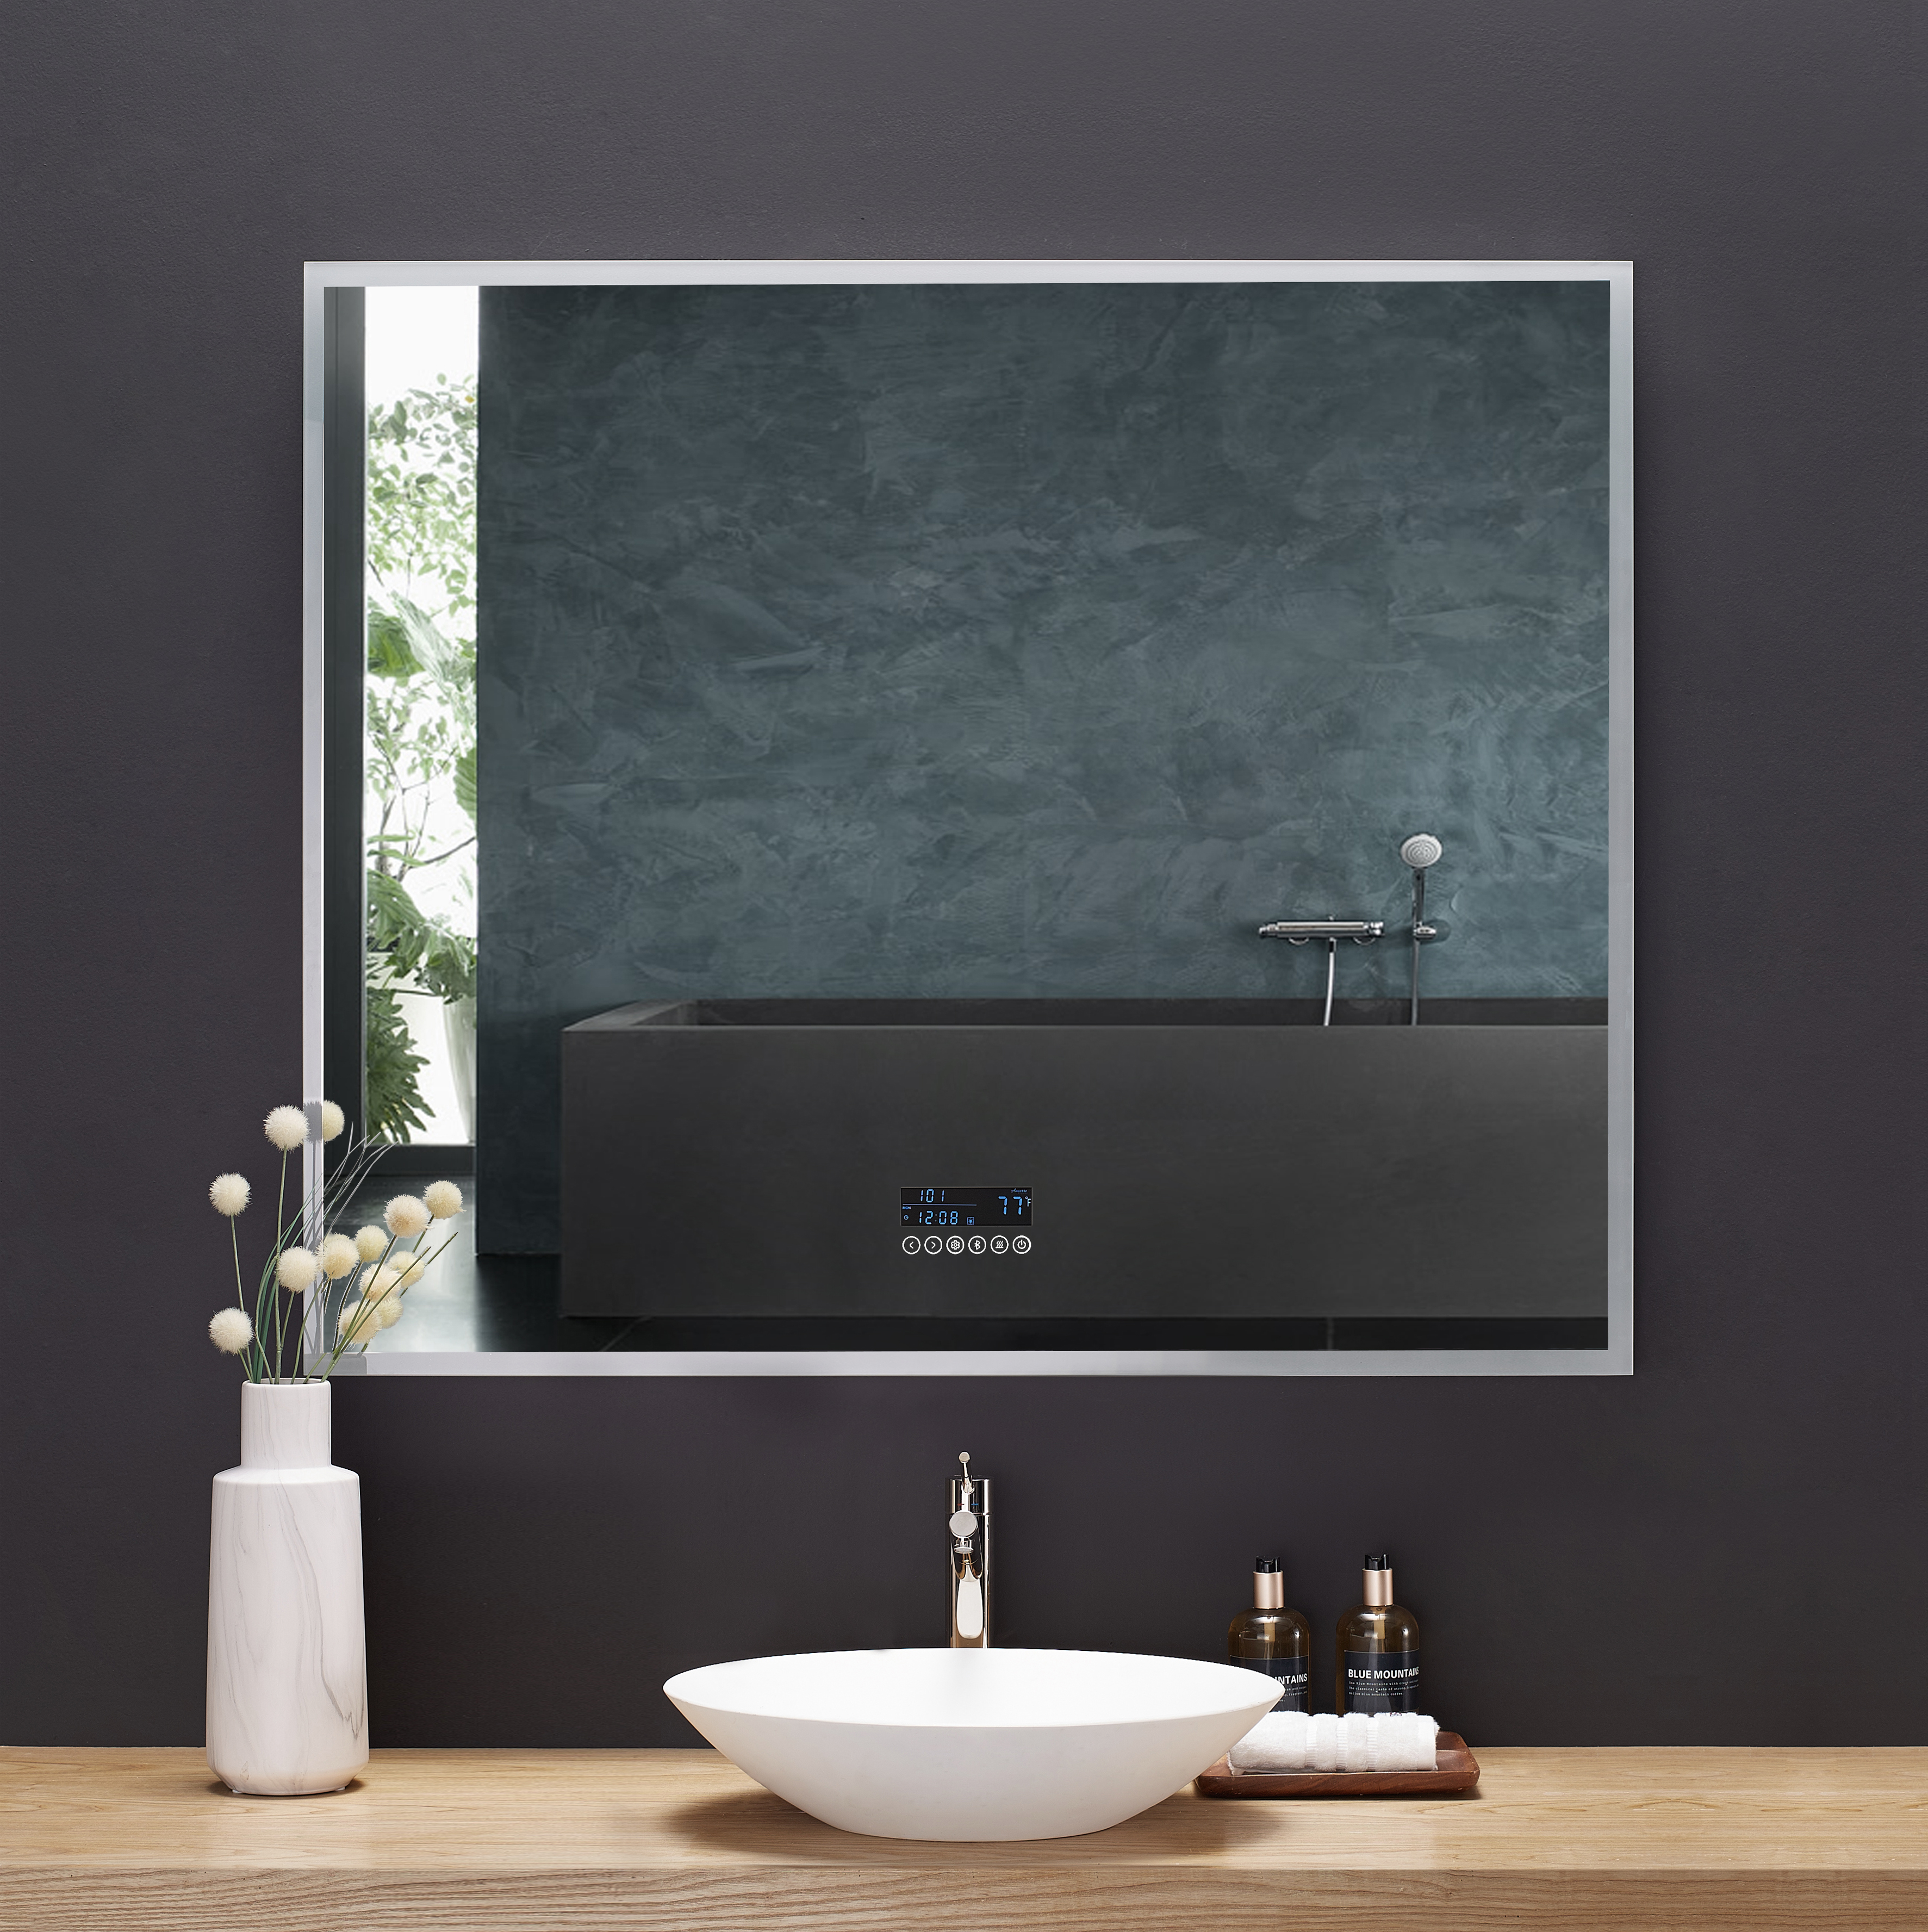 48 in. x 40 in. LED Frameless Mirror with Bluetooth, Defogger and Digital Display 